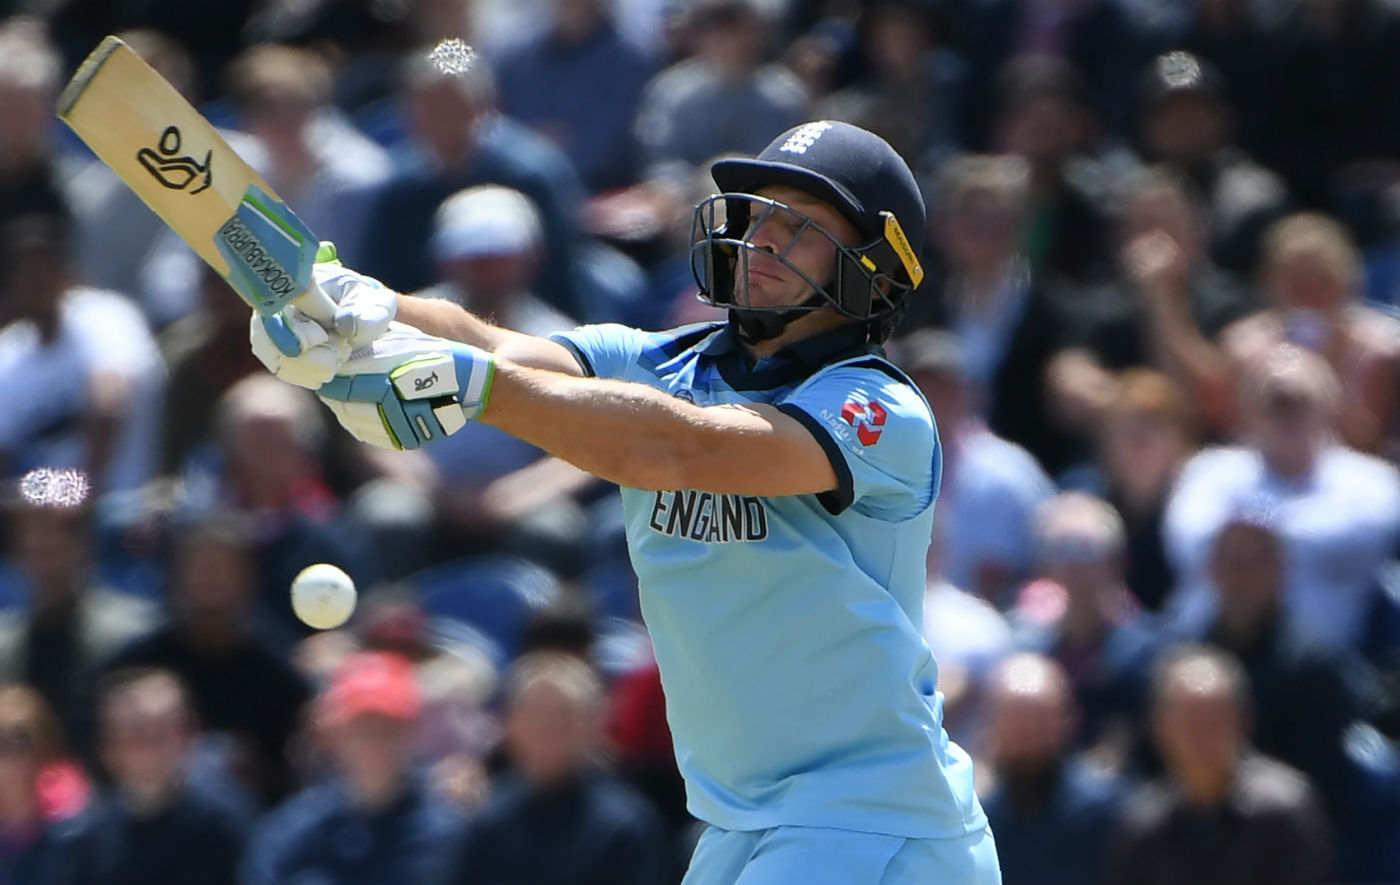 England’s Jos Buttler scored 64 in the win against Bangladesh in Cardiff